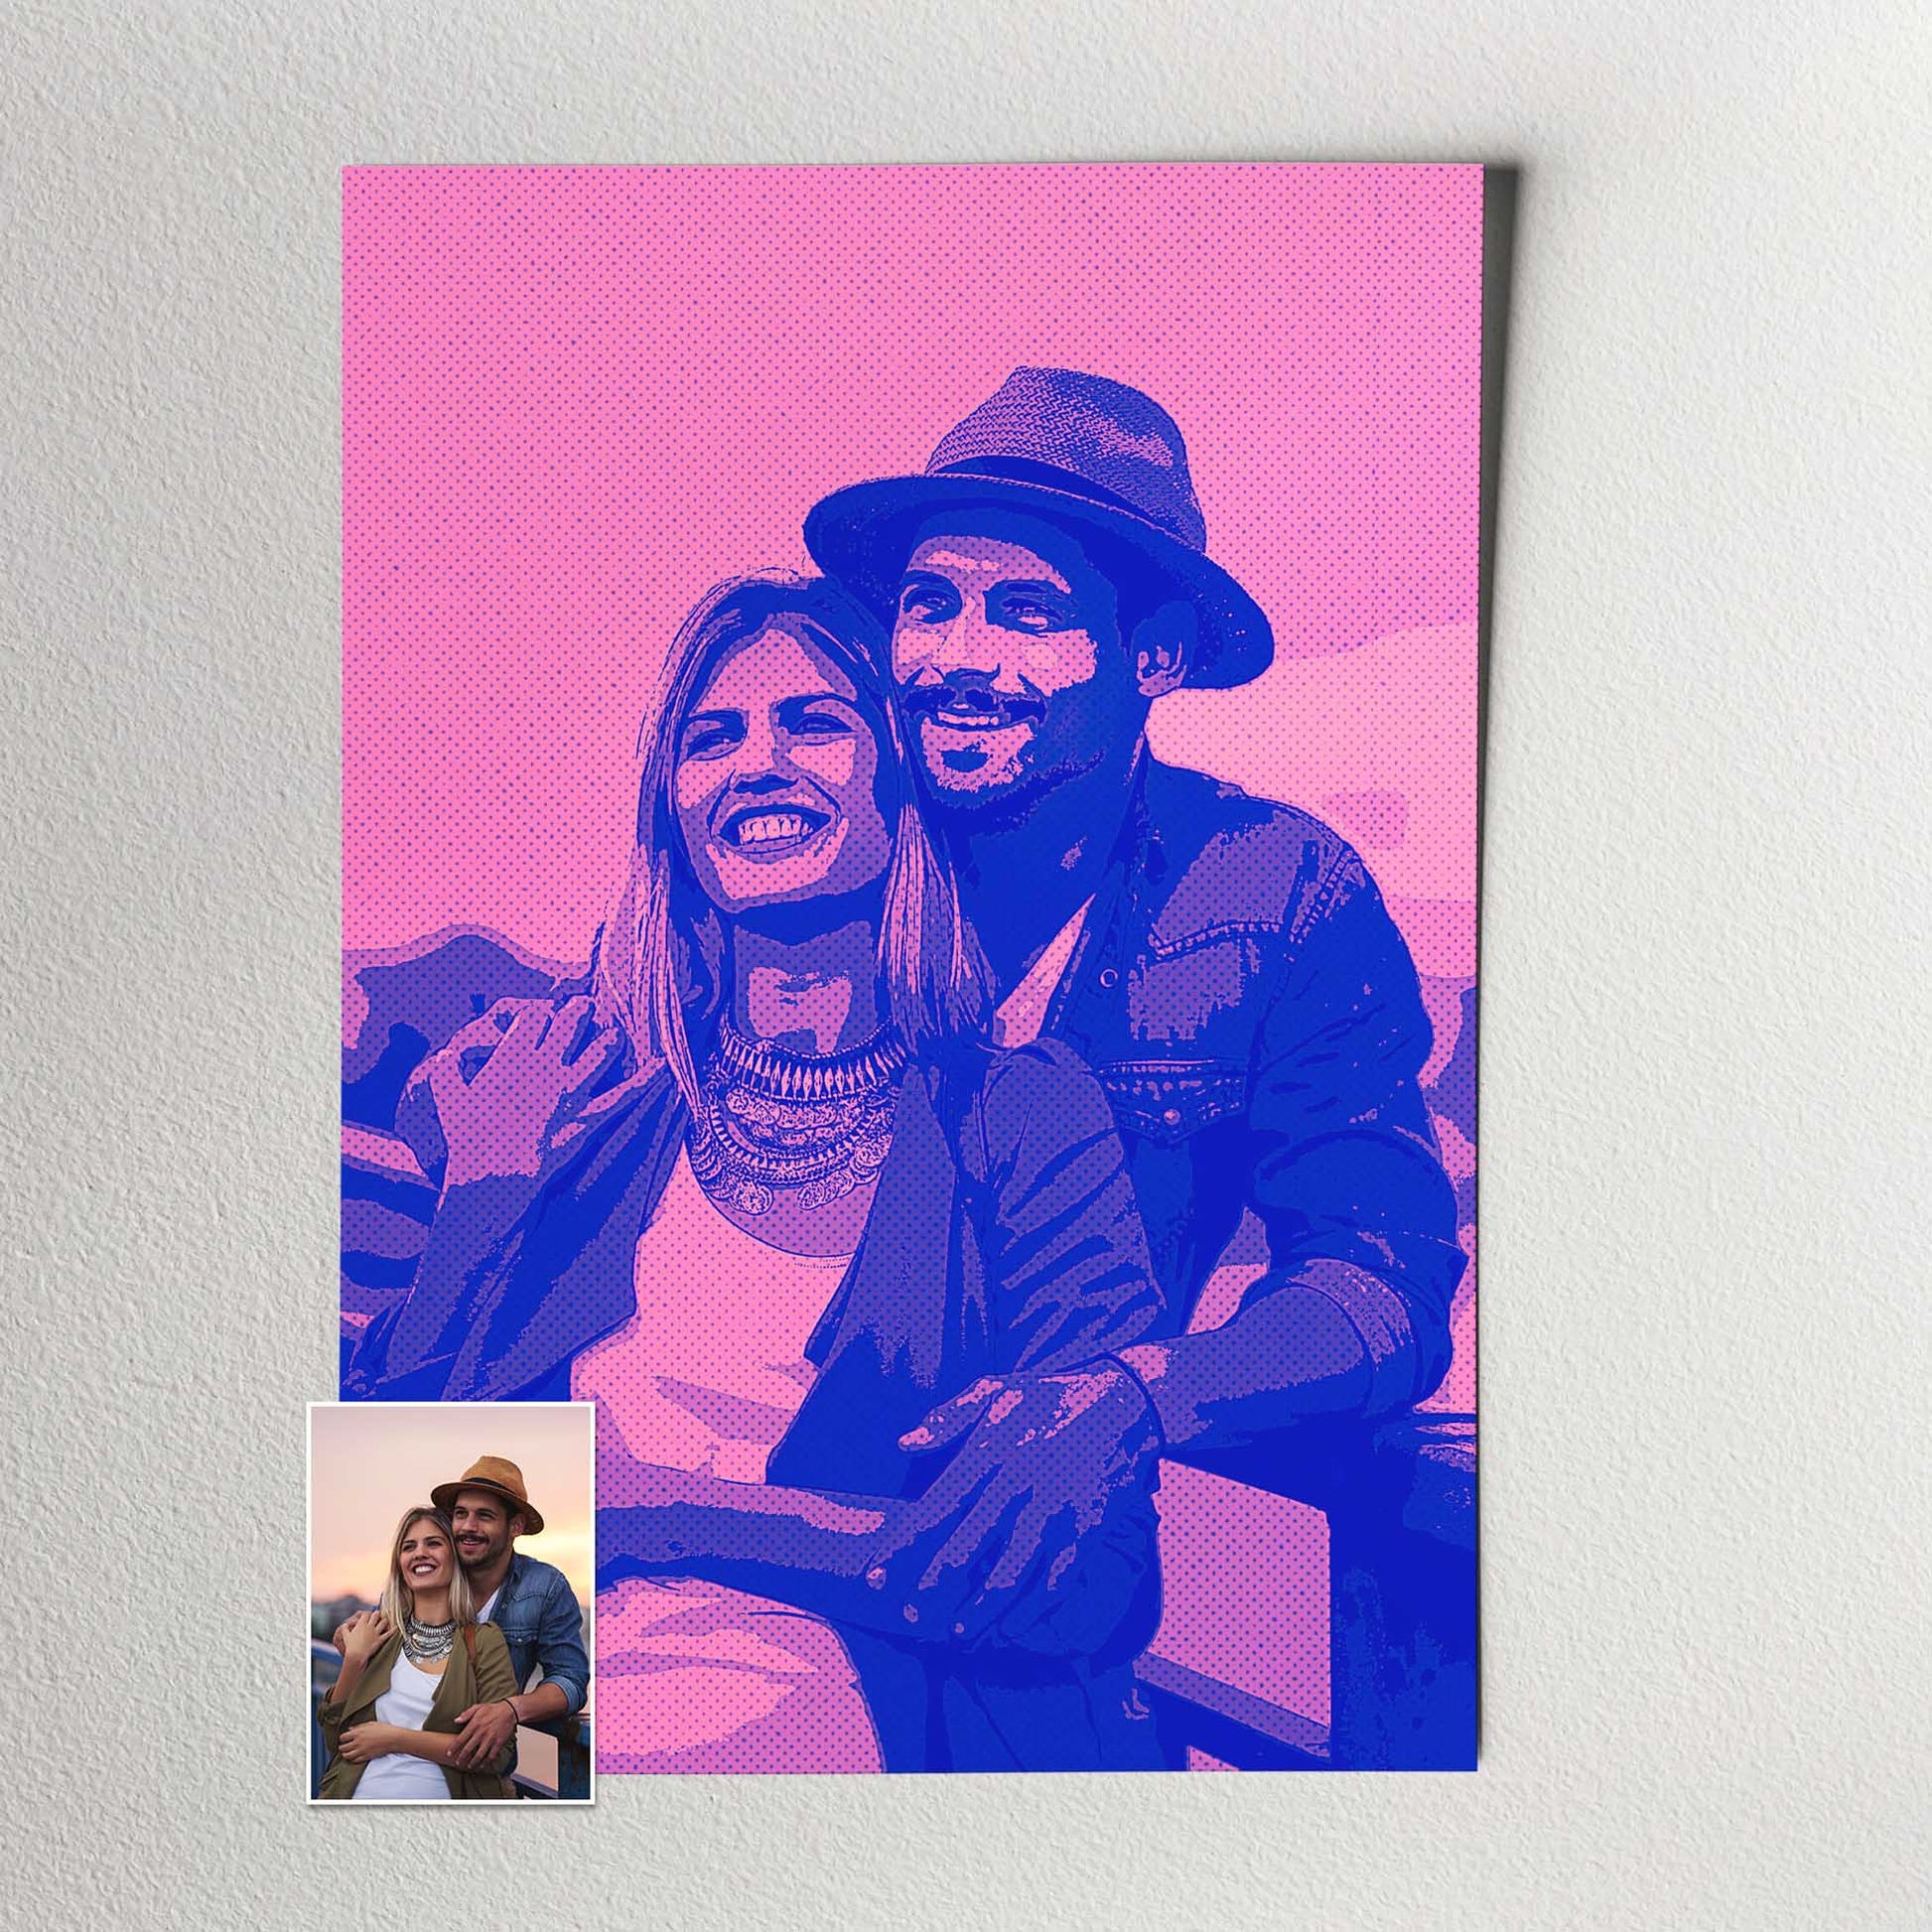 Get ready for a burst of color and creativity with our personalised Purple & Pink Comics Print. Transform your photo into a vibrant cartoon-style artwork, featuring a retro comics effect that adds a touch of old school charm